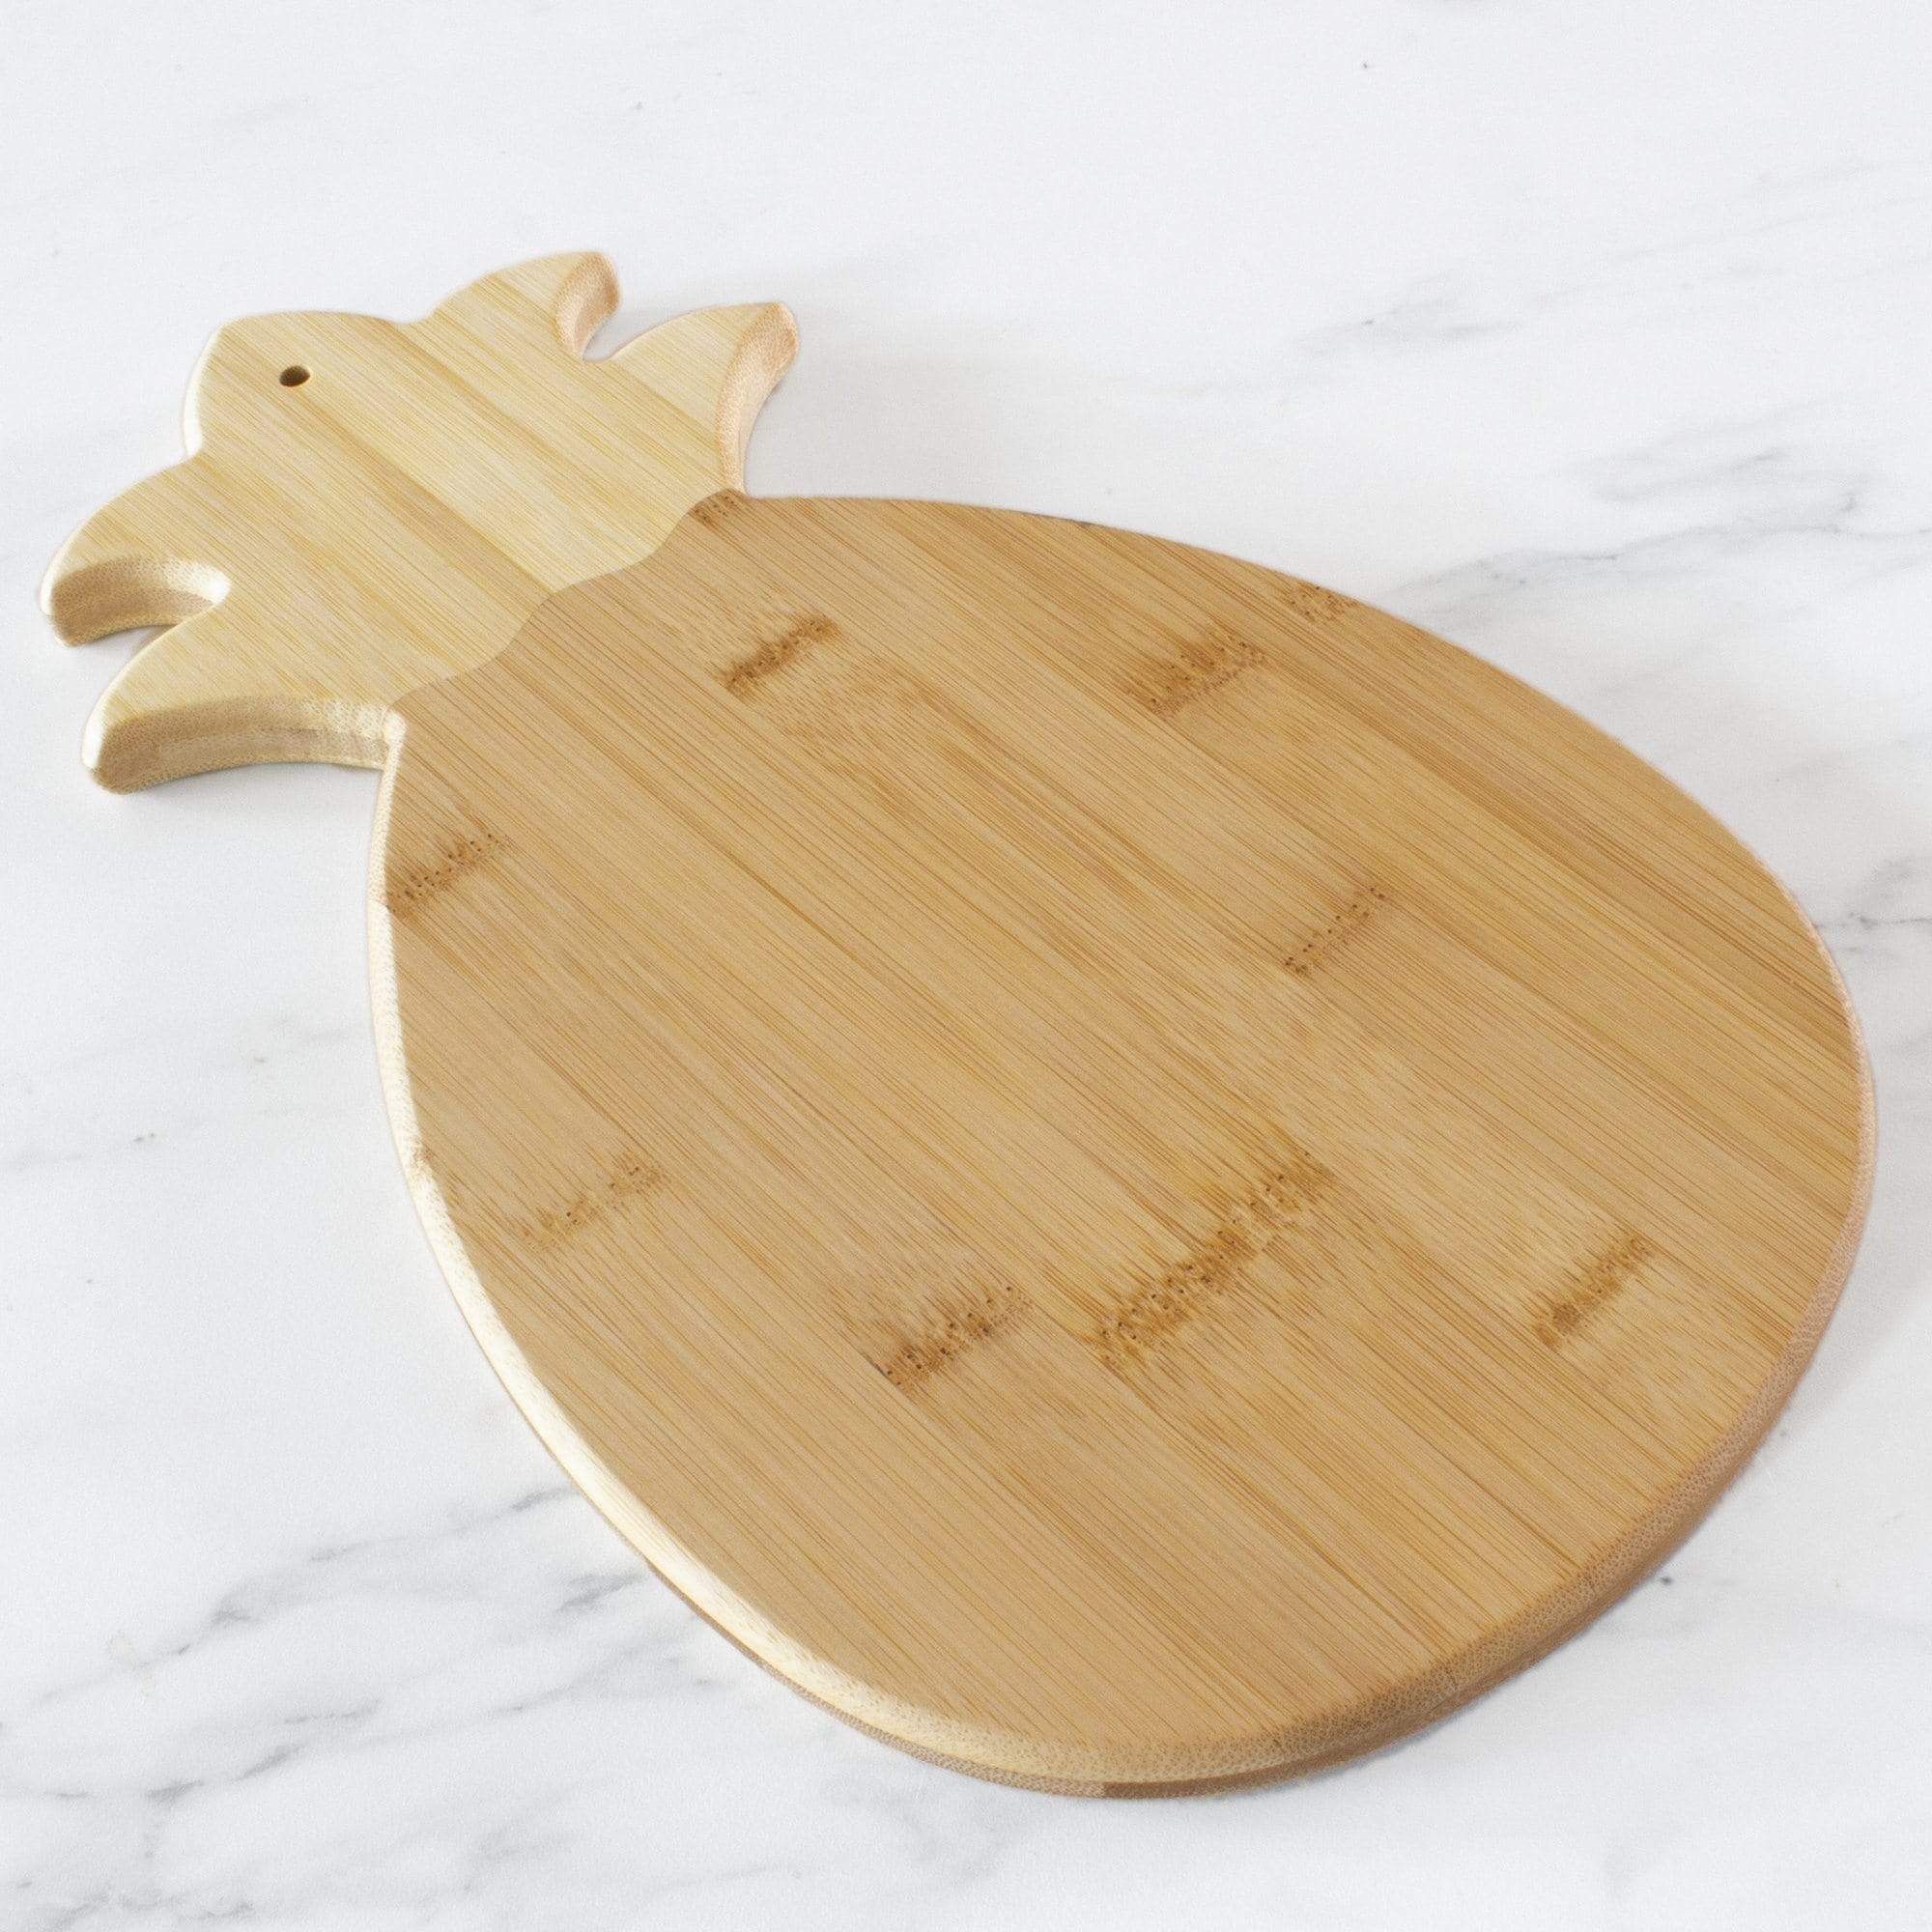  Totally Bamboo Pineapple Shaped Bamboo Wood Cutting Board and  Charcuterie Board, 14-3/8 x 7-1/2: Home & Kitchen